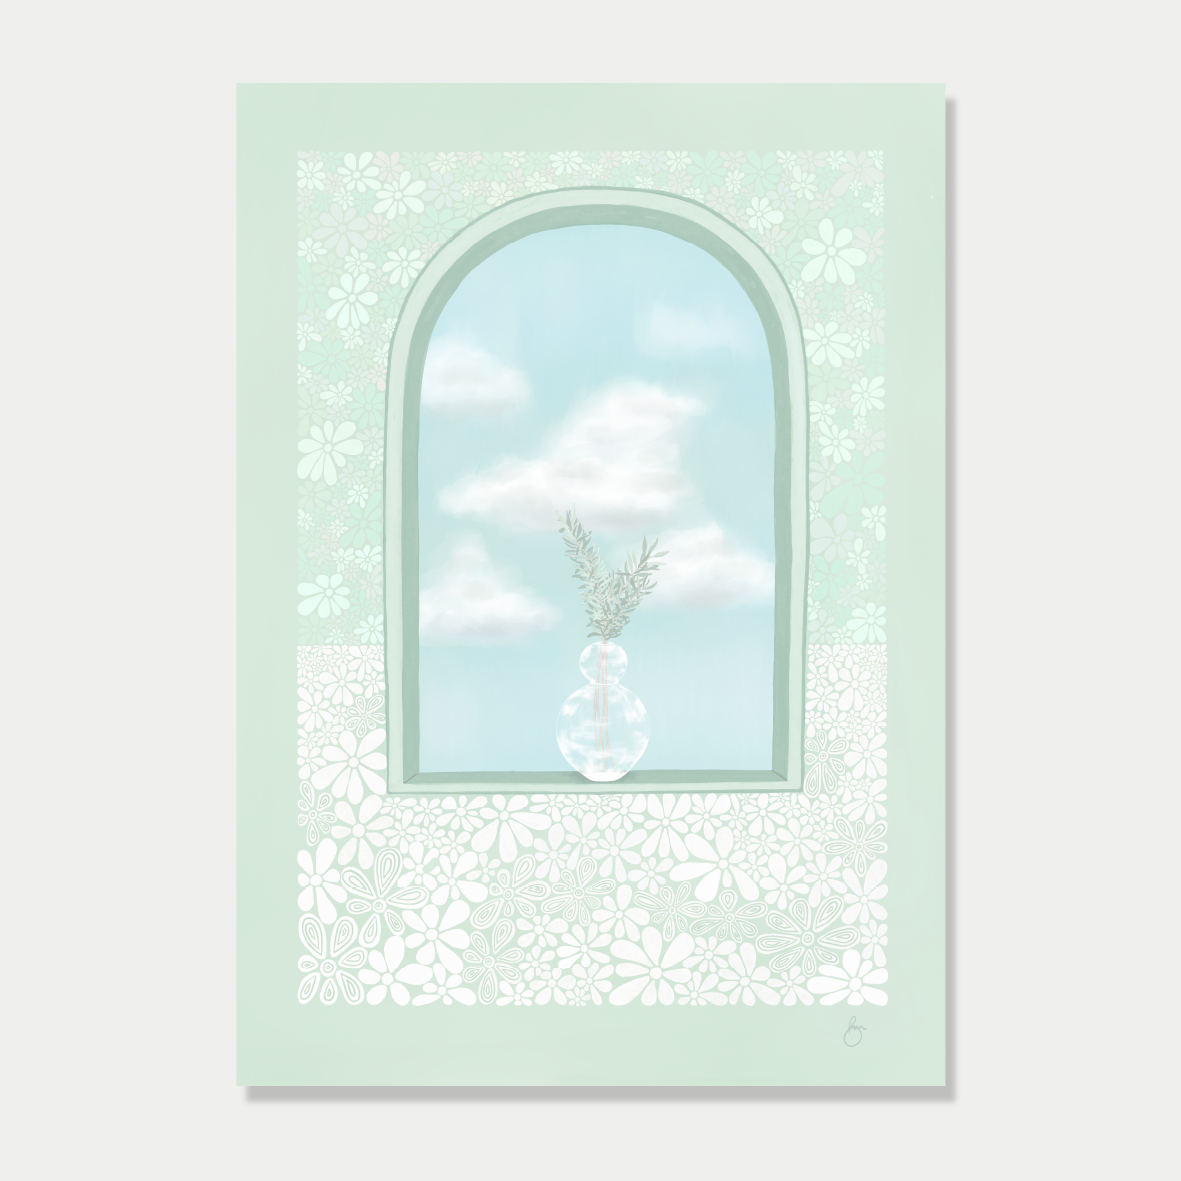 Art print of an arched window with a plant sitting in it and a view of fluffy clouds, in a pastel mint colour palette, by Bon Jung. Printed in New Zealand by endemicworld.